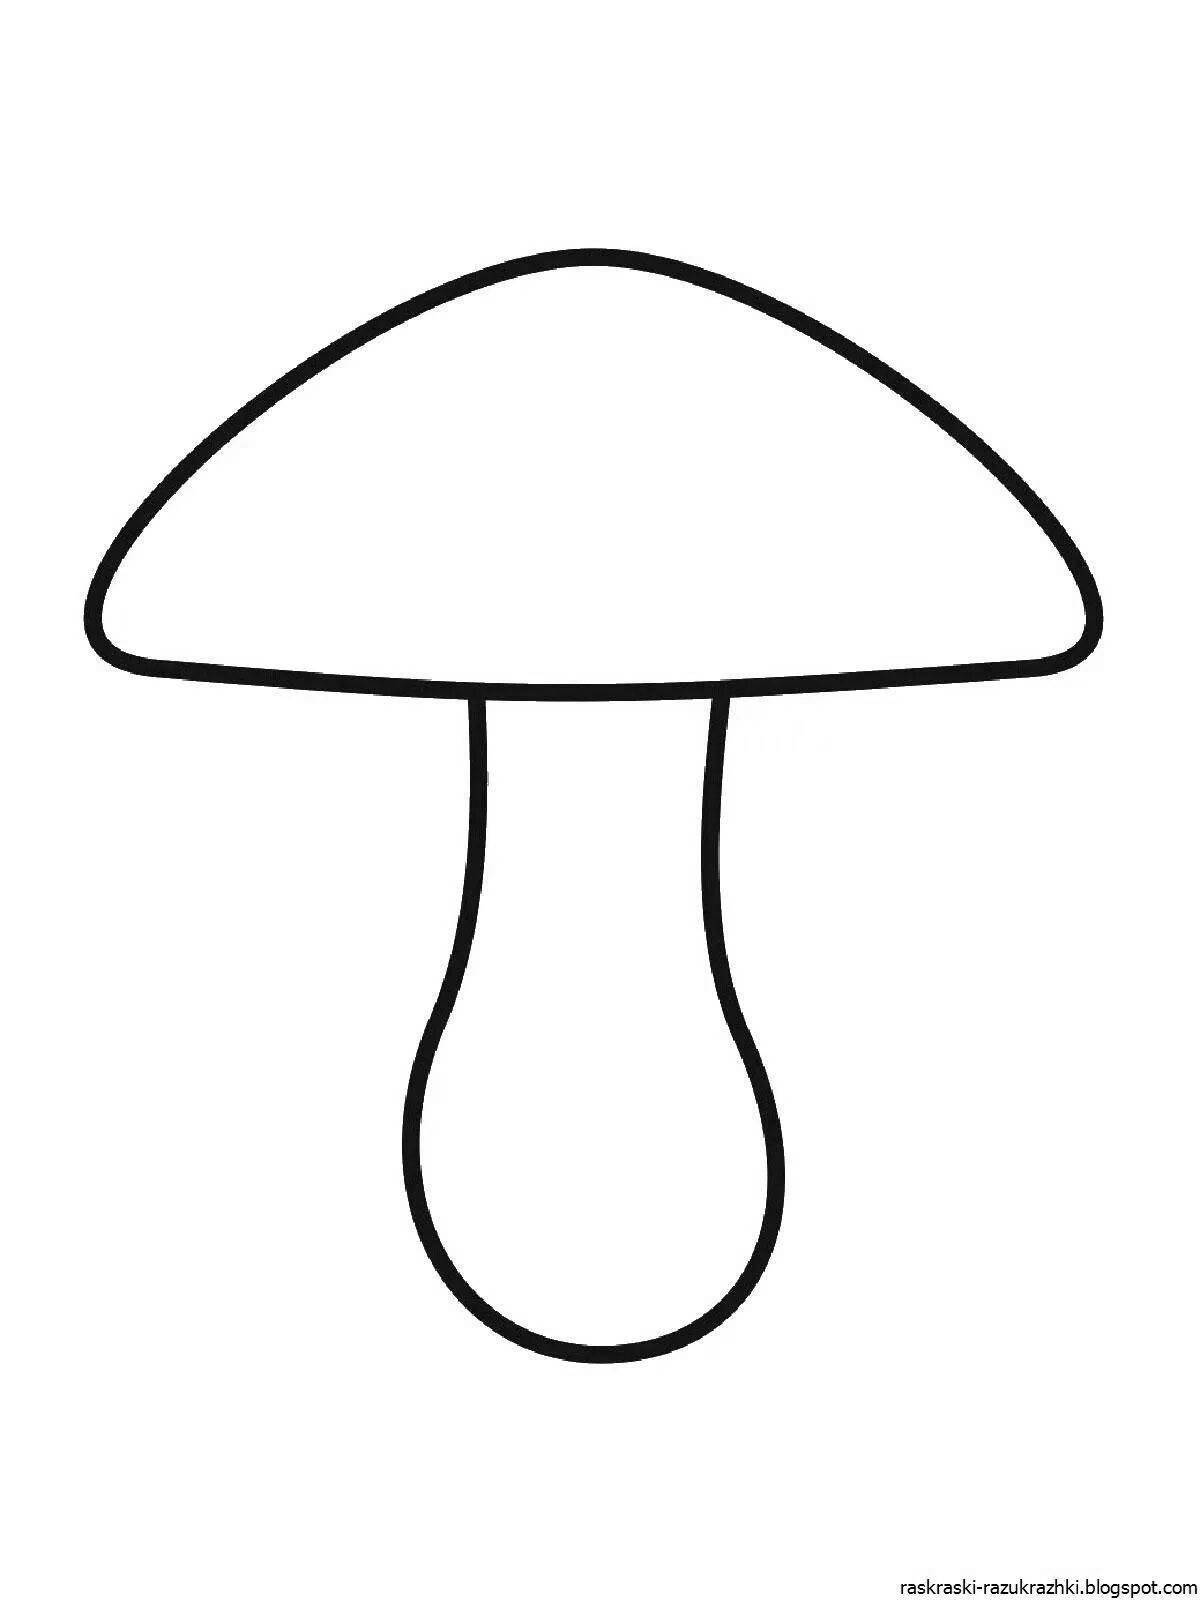 Wonderful porcini mushrooms coloring pages for kids